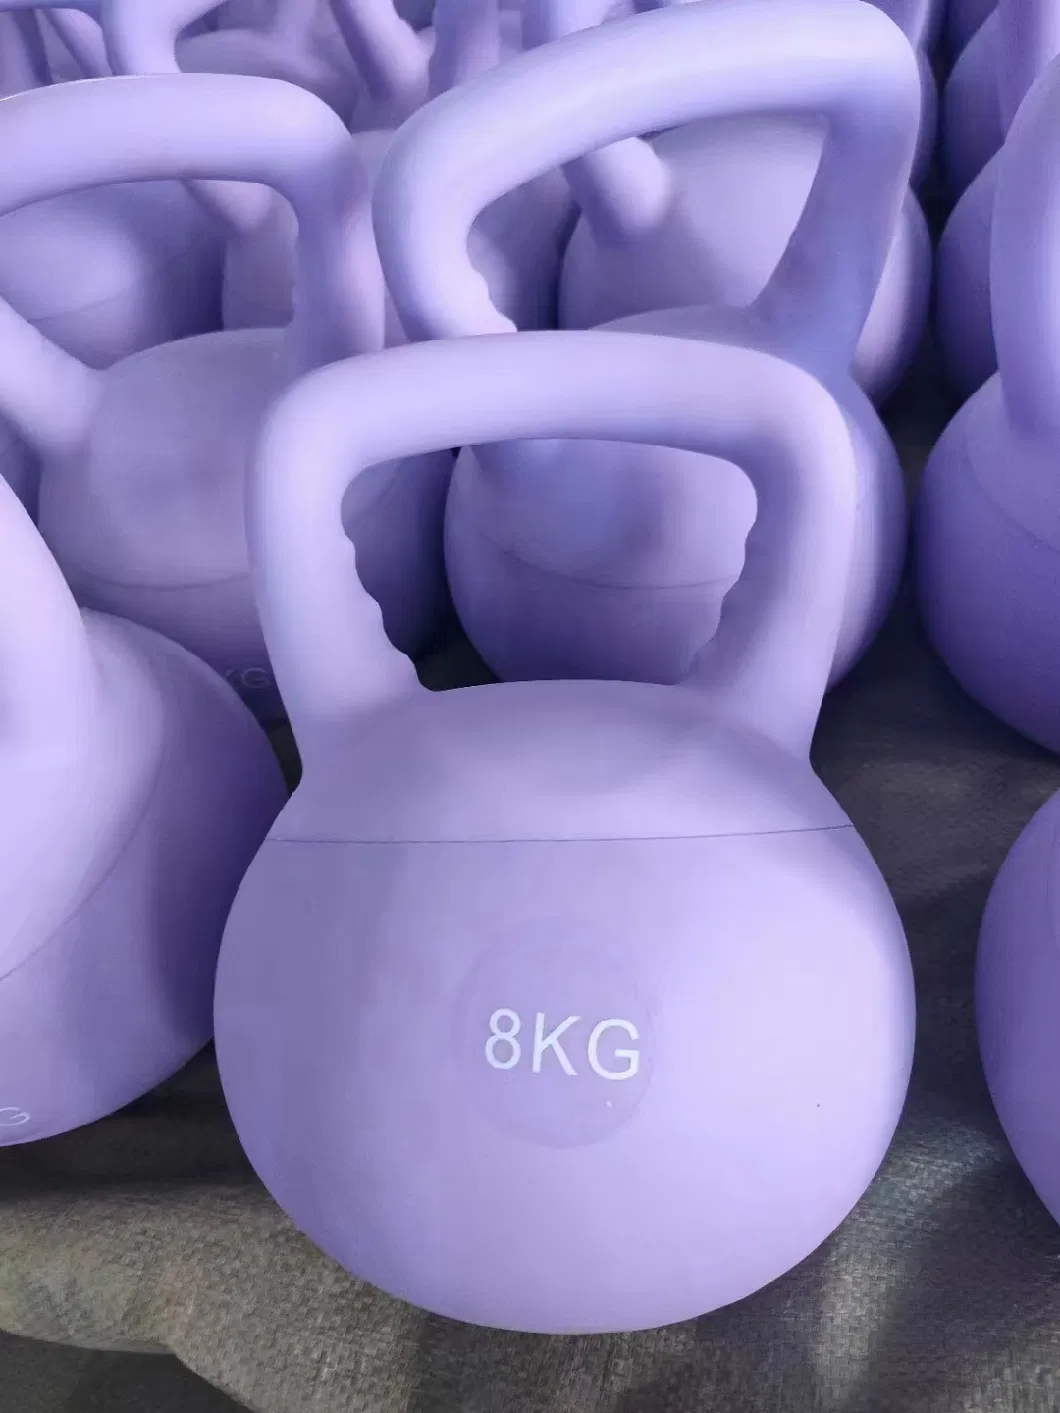 Hot Selling 4kg Soft Kettlebells with Cushioned Impact-Resistant Base and Anti-Slip, Wide-Grip Handle for Home Workouts, Weightlifting, and Personal Training